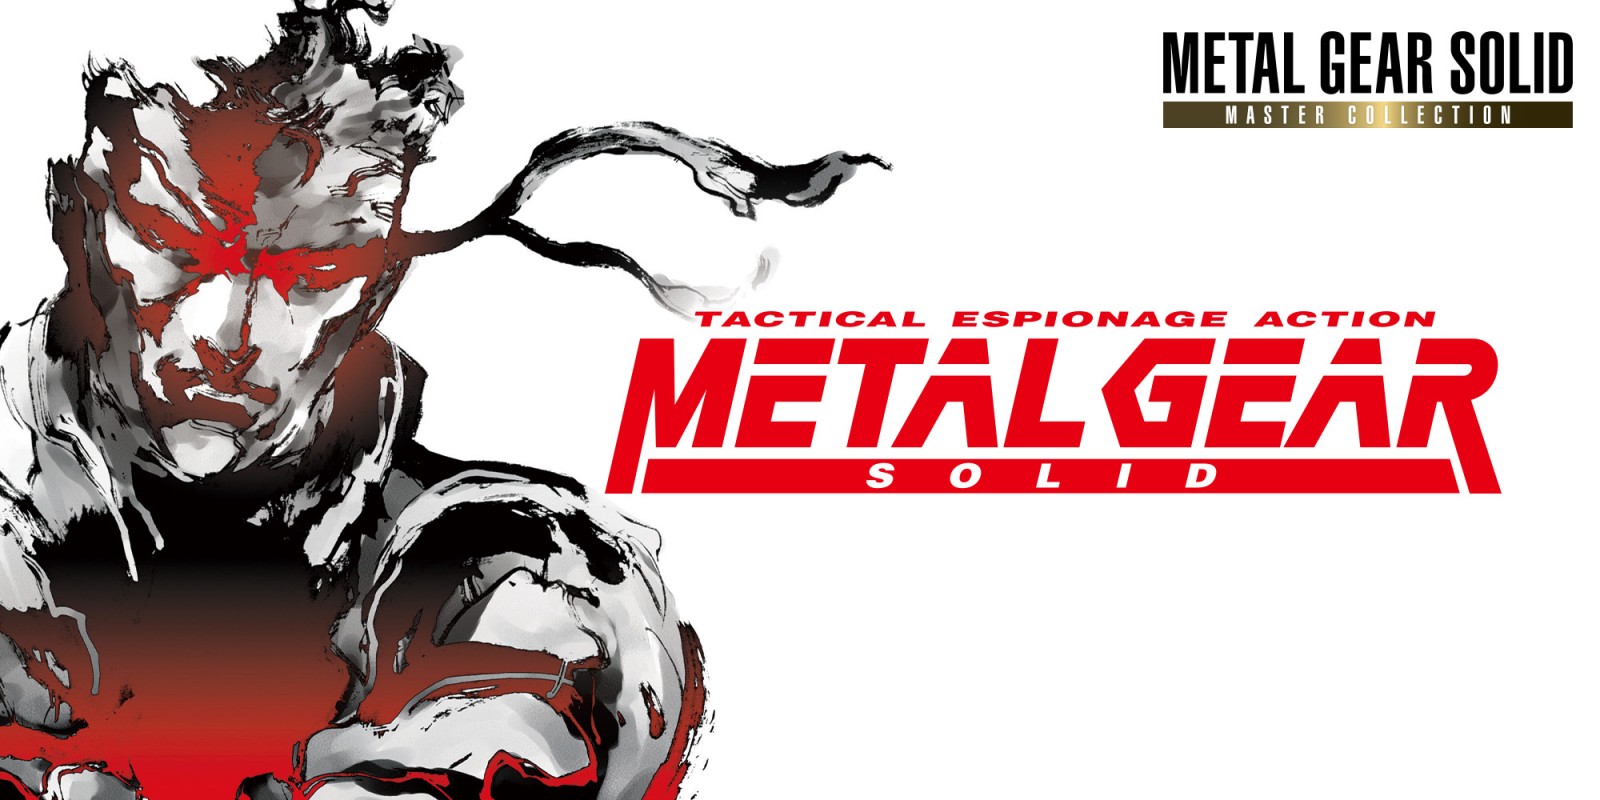 METAL GEAR SOLID - Master Collection Version | Nintendo Switch Download ...